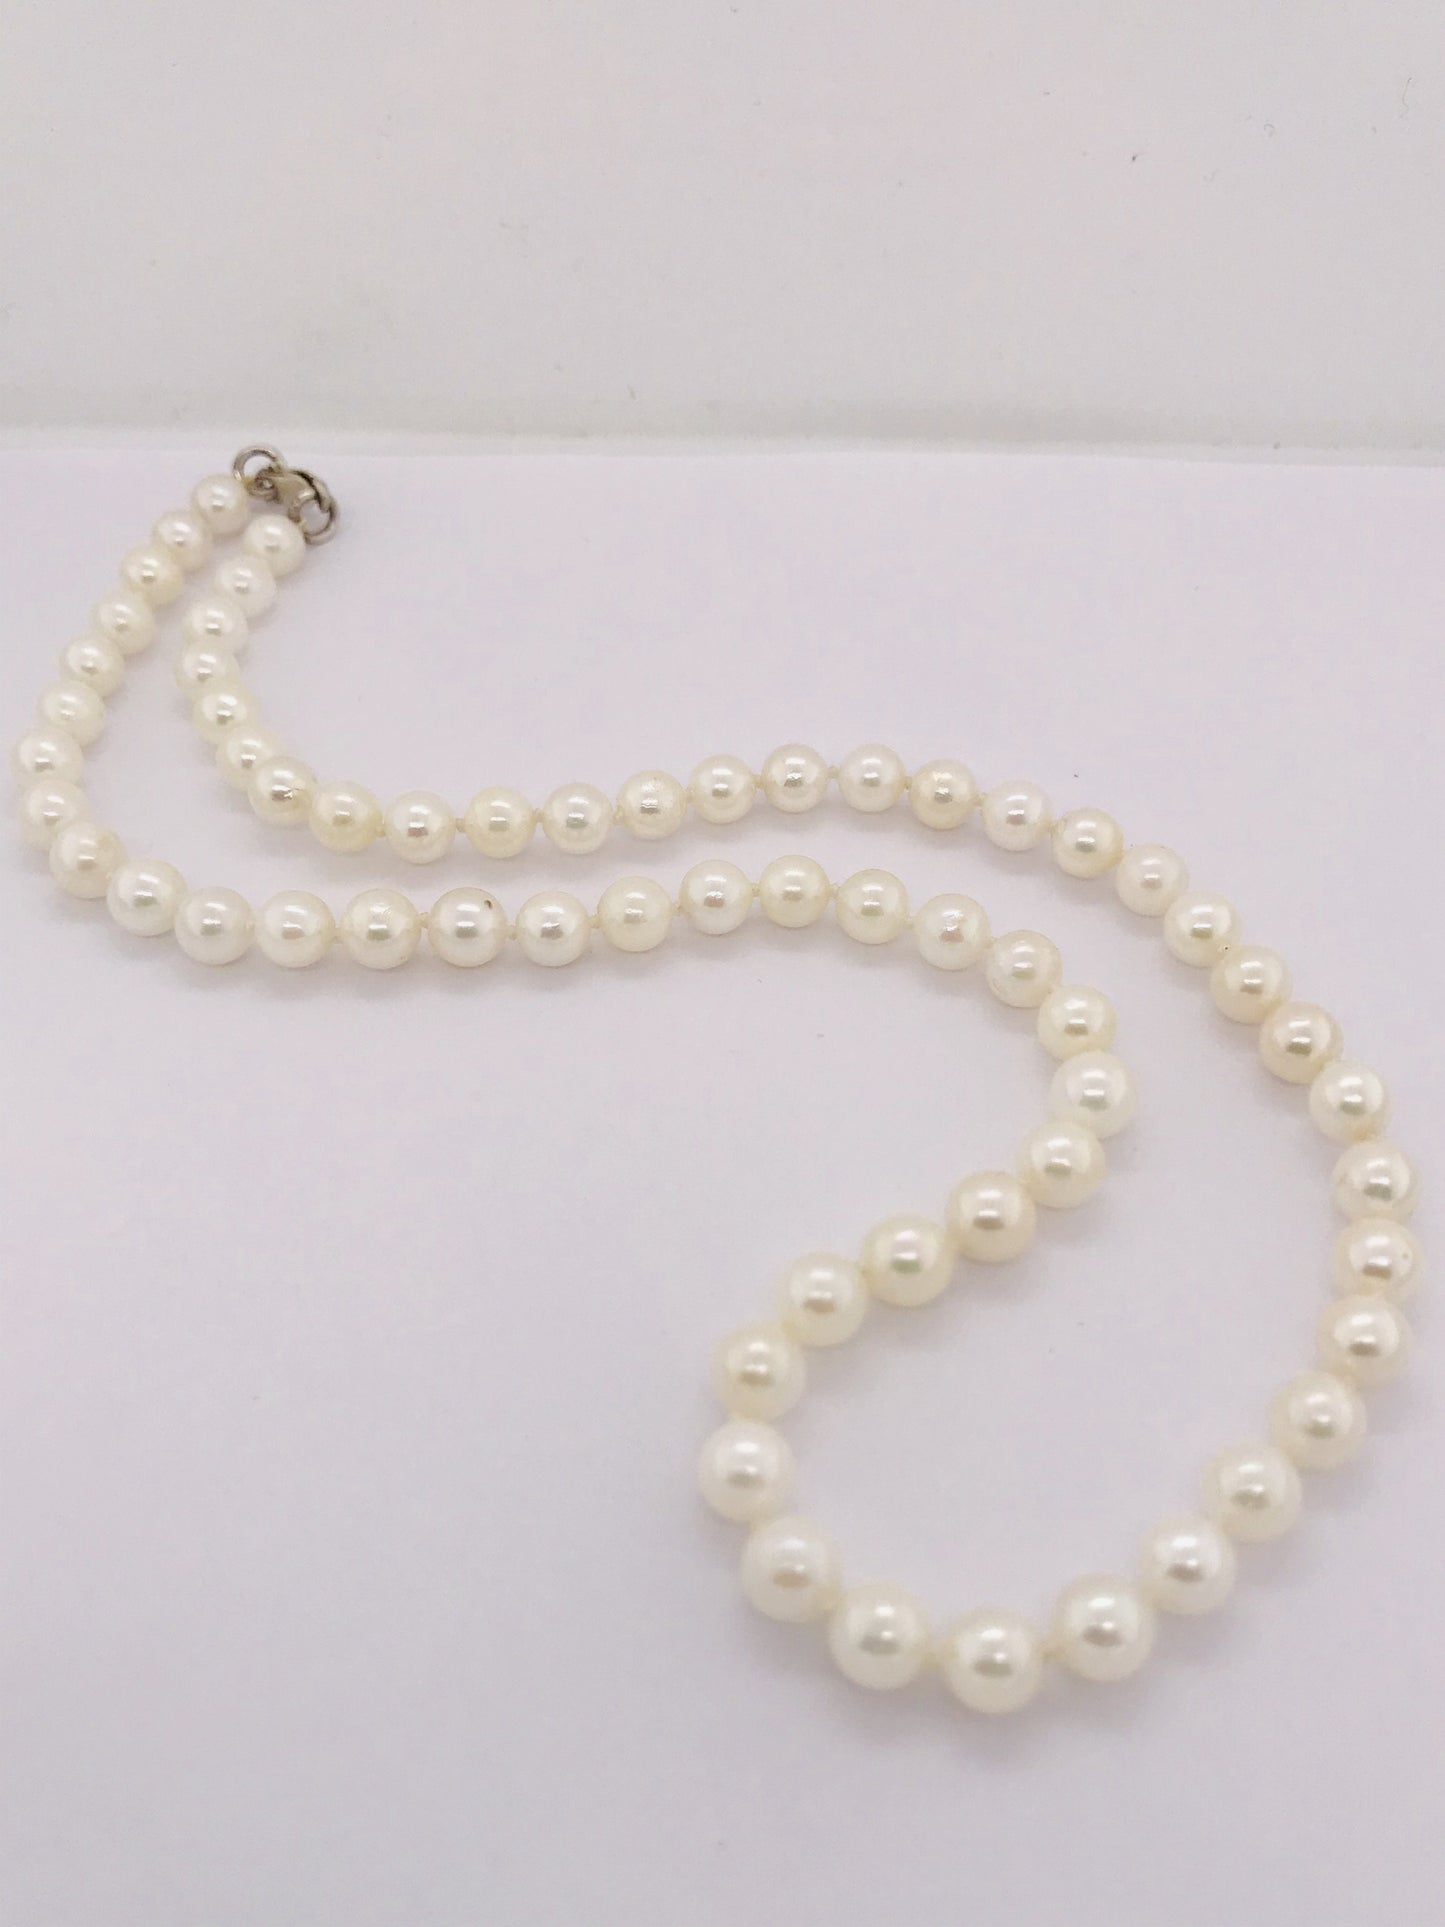 STERLING SILVER JAPANESE PEARL NECKLACE